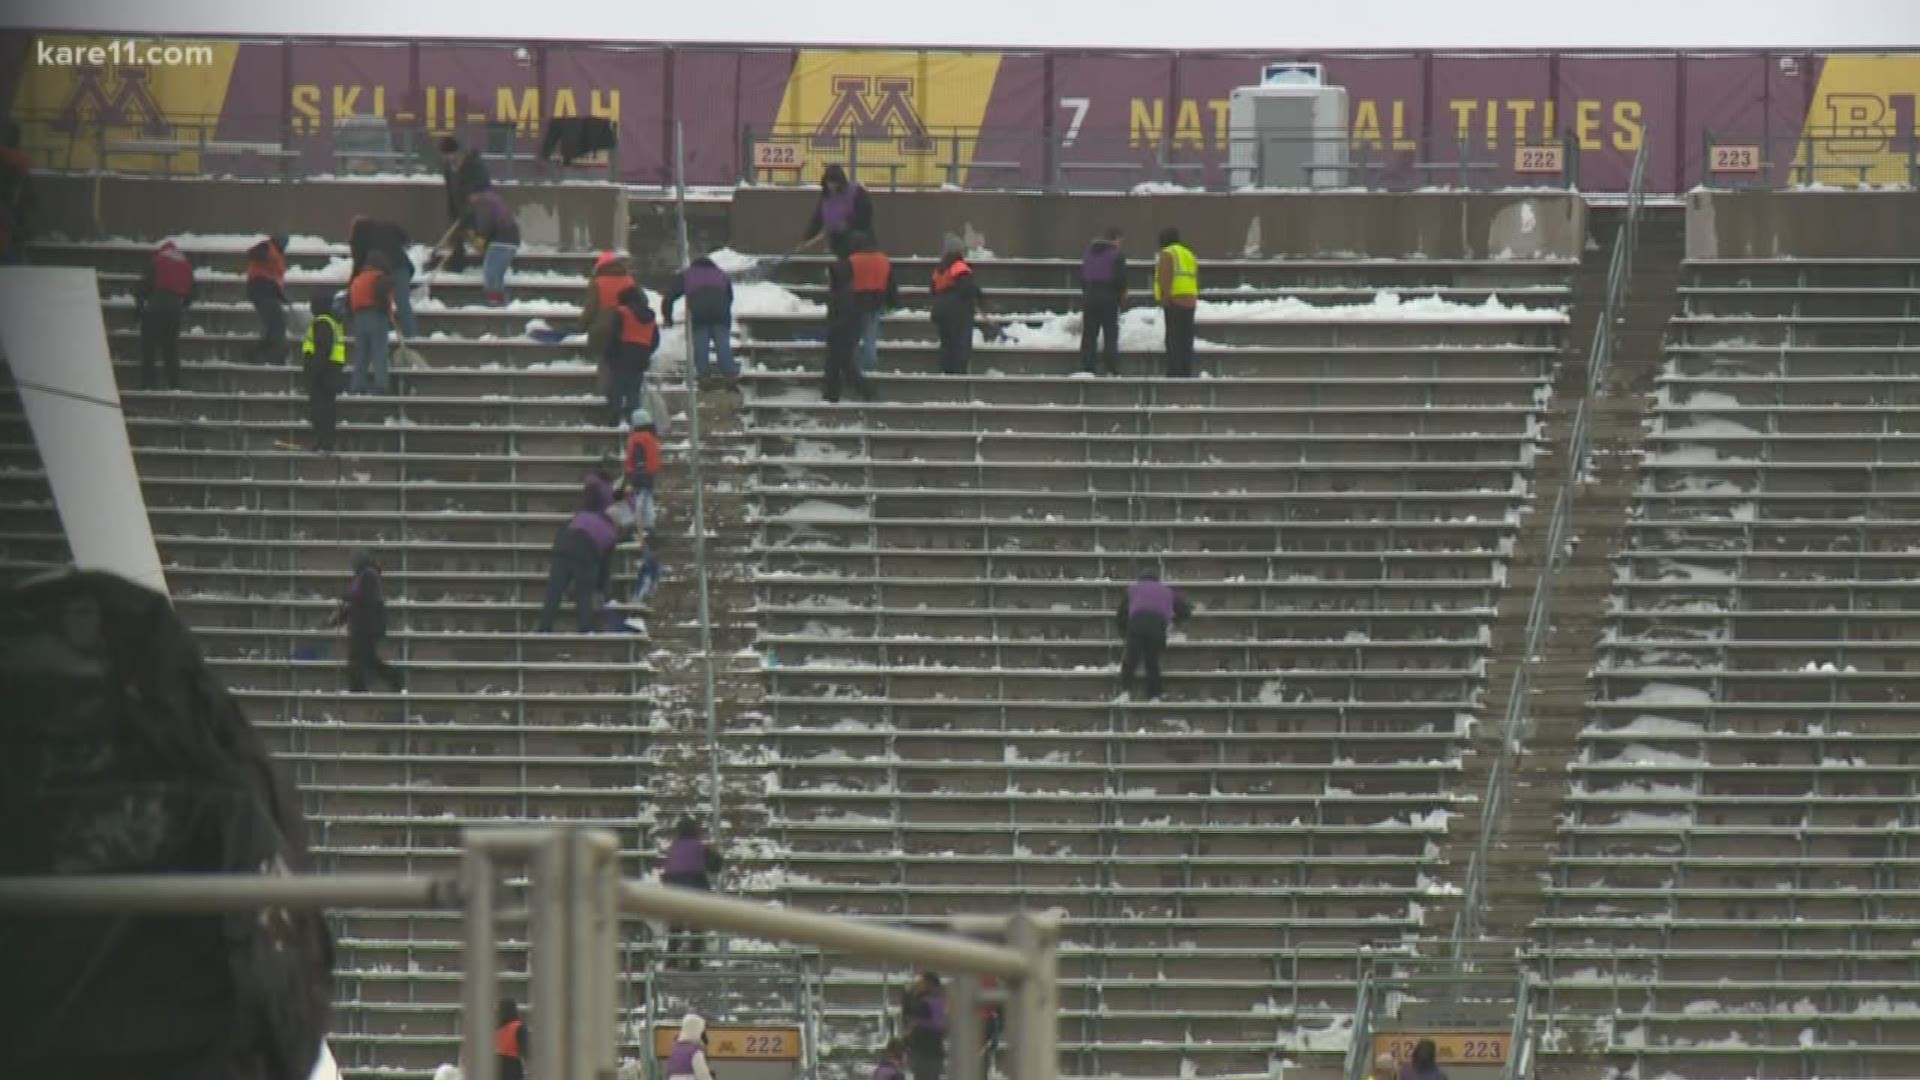 The weather might not be pretty for Saturday's Minnesota-Wisconsin tilt, but that won't slow anyone